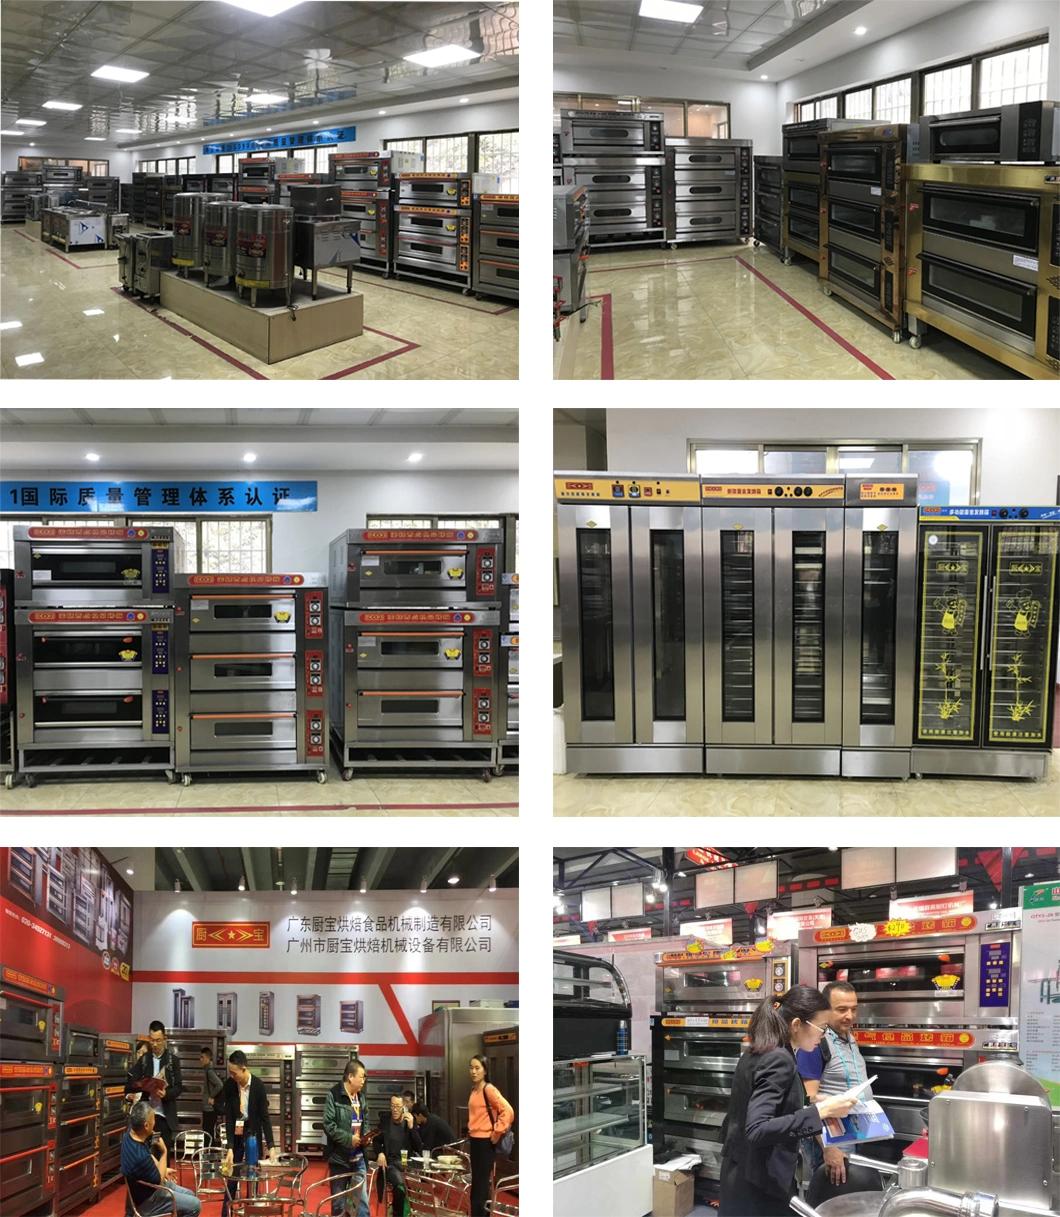 3 Deck 9 Tray Electirc Oven for Commercial Kitchen Baking Equipment Bakery Machine Food Machinery